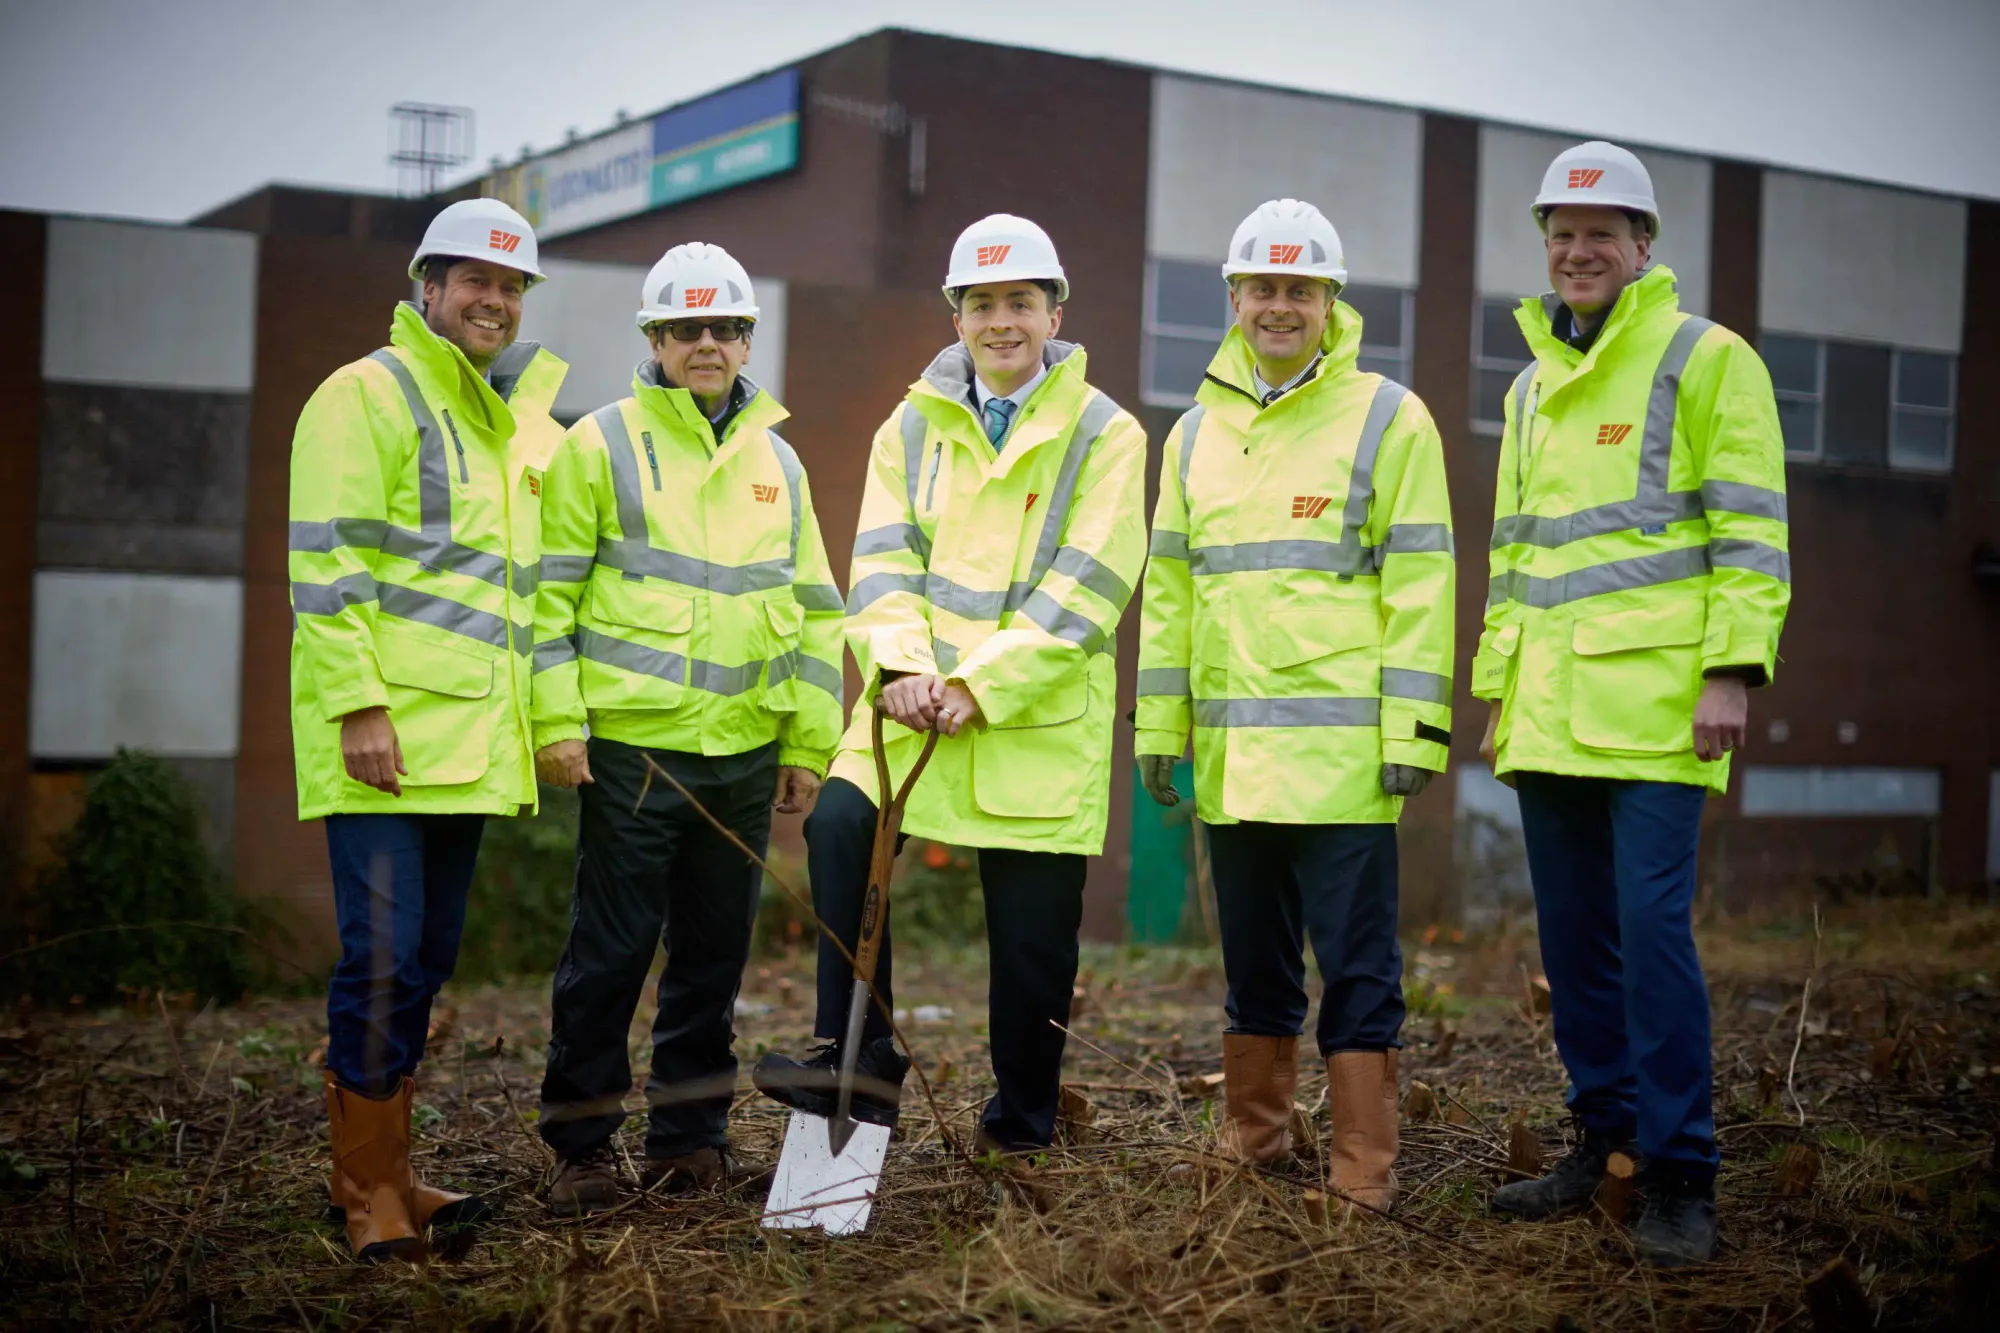 Leader of Trafford Council, Cllr Sean Anstee (centre), on the Altair site this week with (l-r) Nick Payne, MD of Nikal, Peter Barr, Head of Pre-Construction at Eric Wright Group, Jeremy Hartley, MD of Eric Wright Group, and Cllr Alex Williams, Deputy leader of Trafford Council